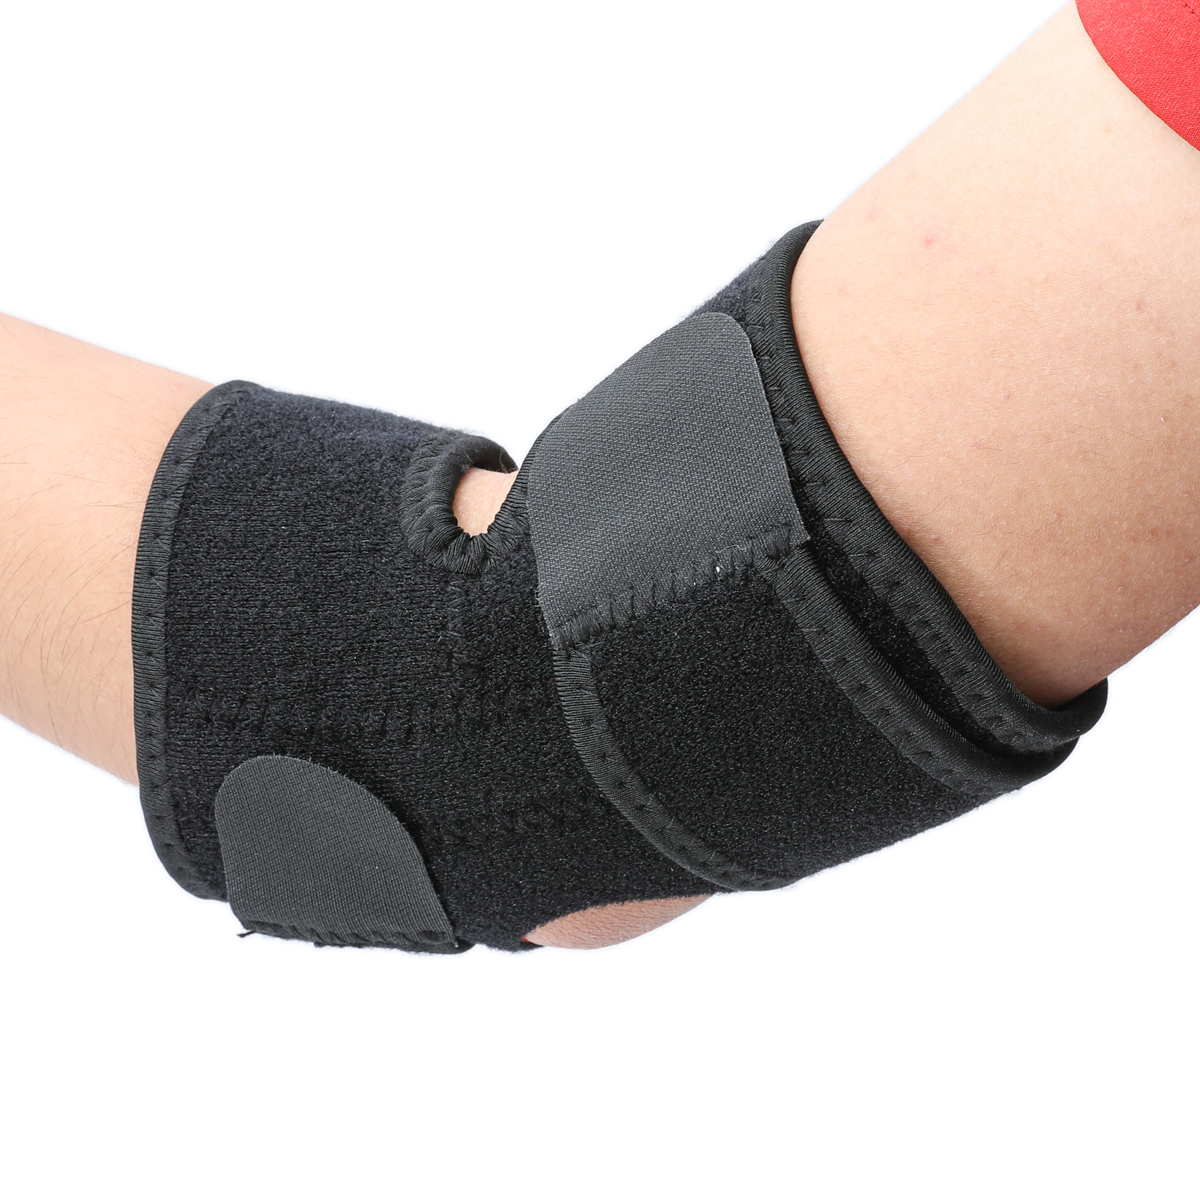 Adjustable-Elbow-Brace-Breathable-Neoprene-Support-with-Dual-Spring-Stabilisers-Arm-Wrap-Elbow-Strap-1648965-8